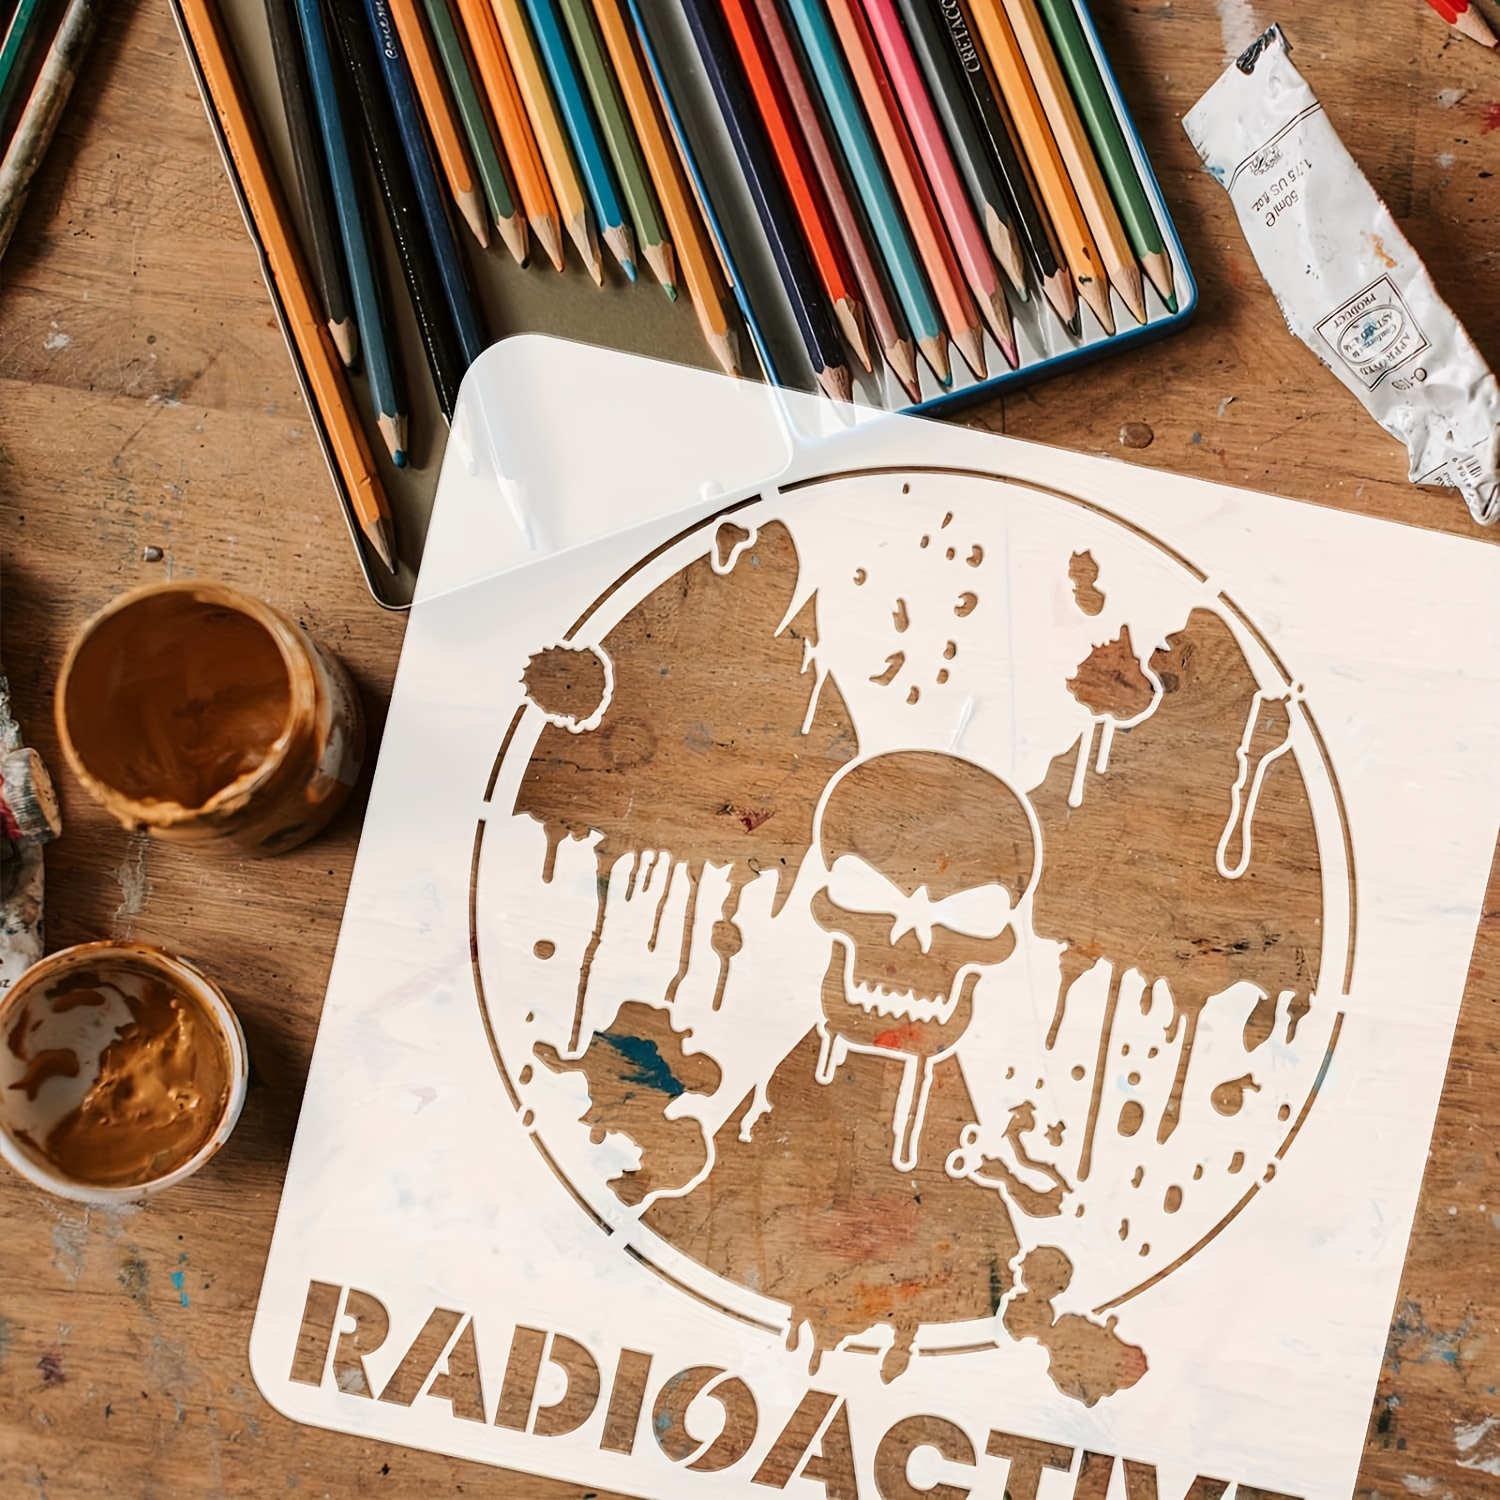 

1pc Radioactive Stencil For Painting 11.8x11.8inch Radiation Hazard Warning Stencil Radioactive Sign Stencil Reusable Stencils Of A Radioactive Symbol For Painting On Wall Wood Furniture